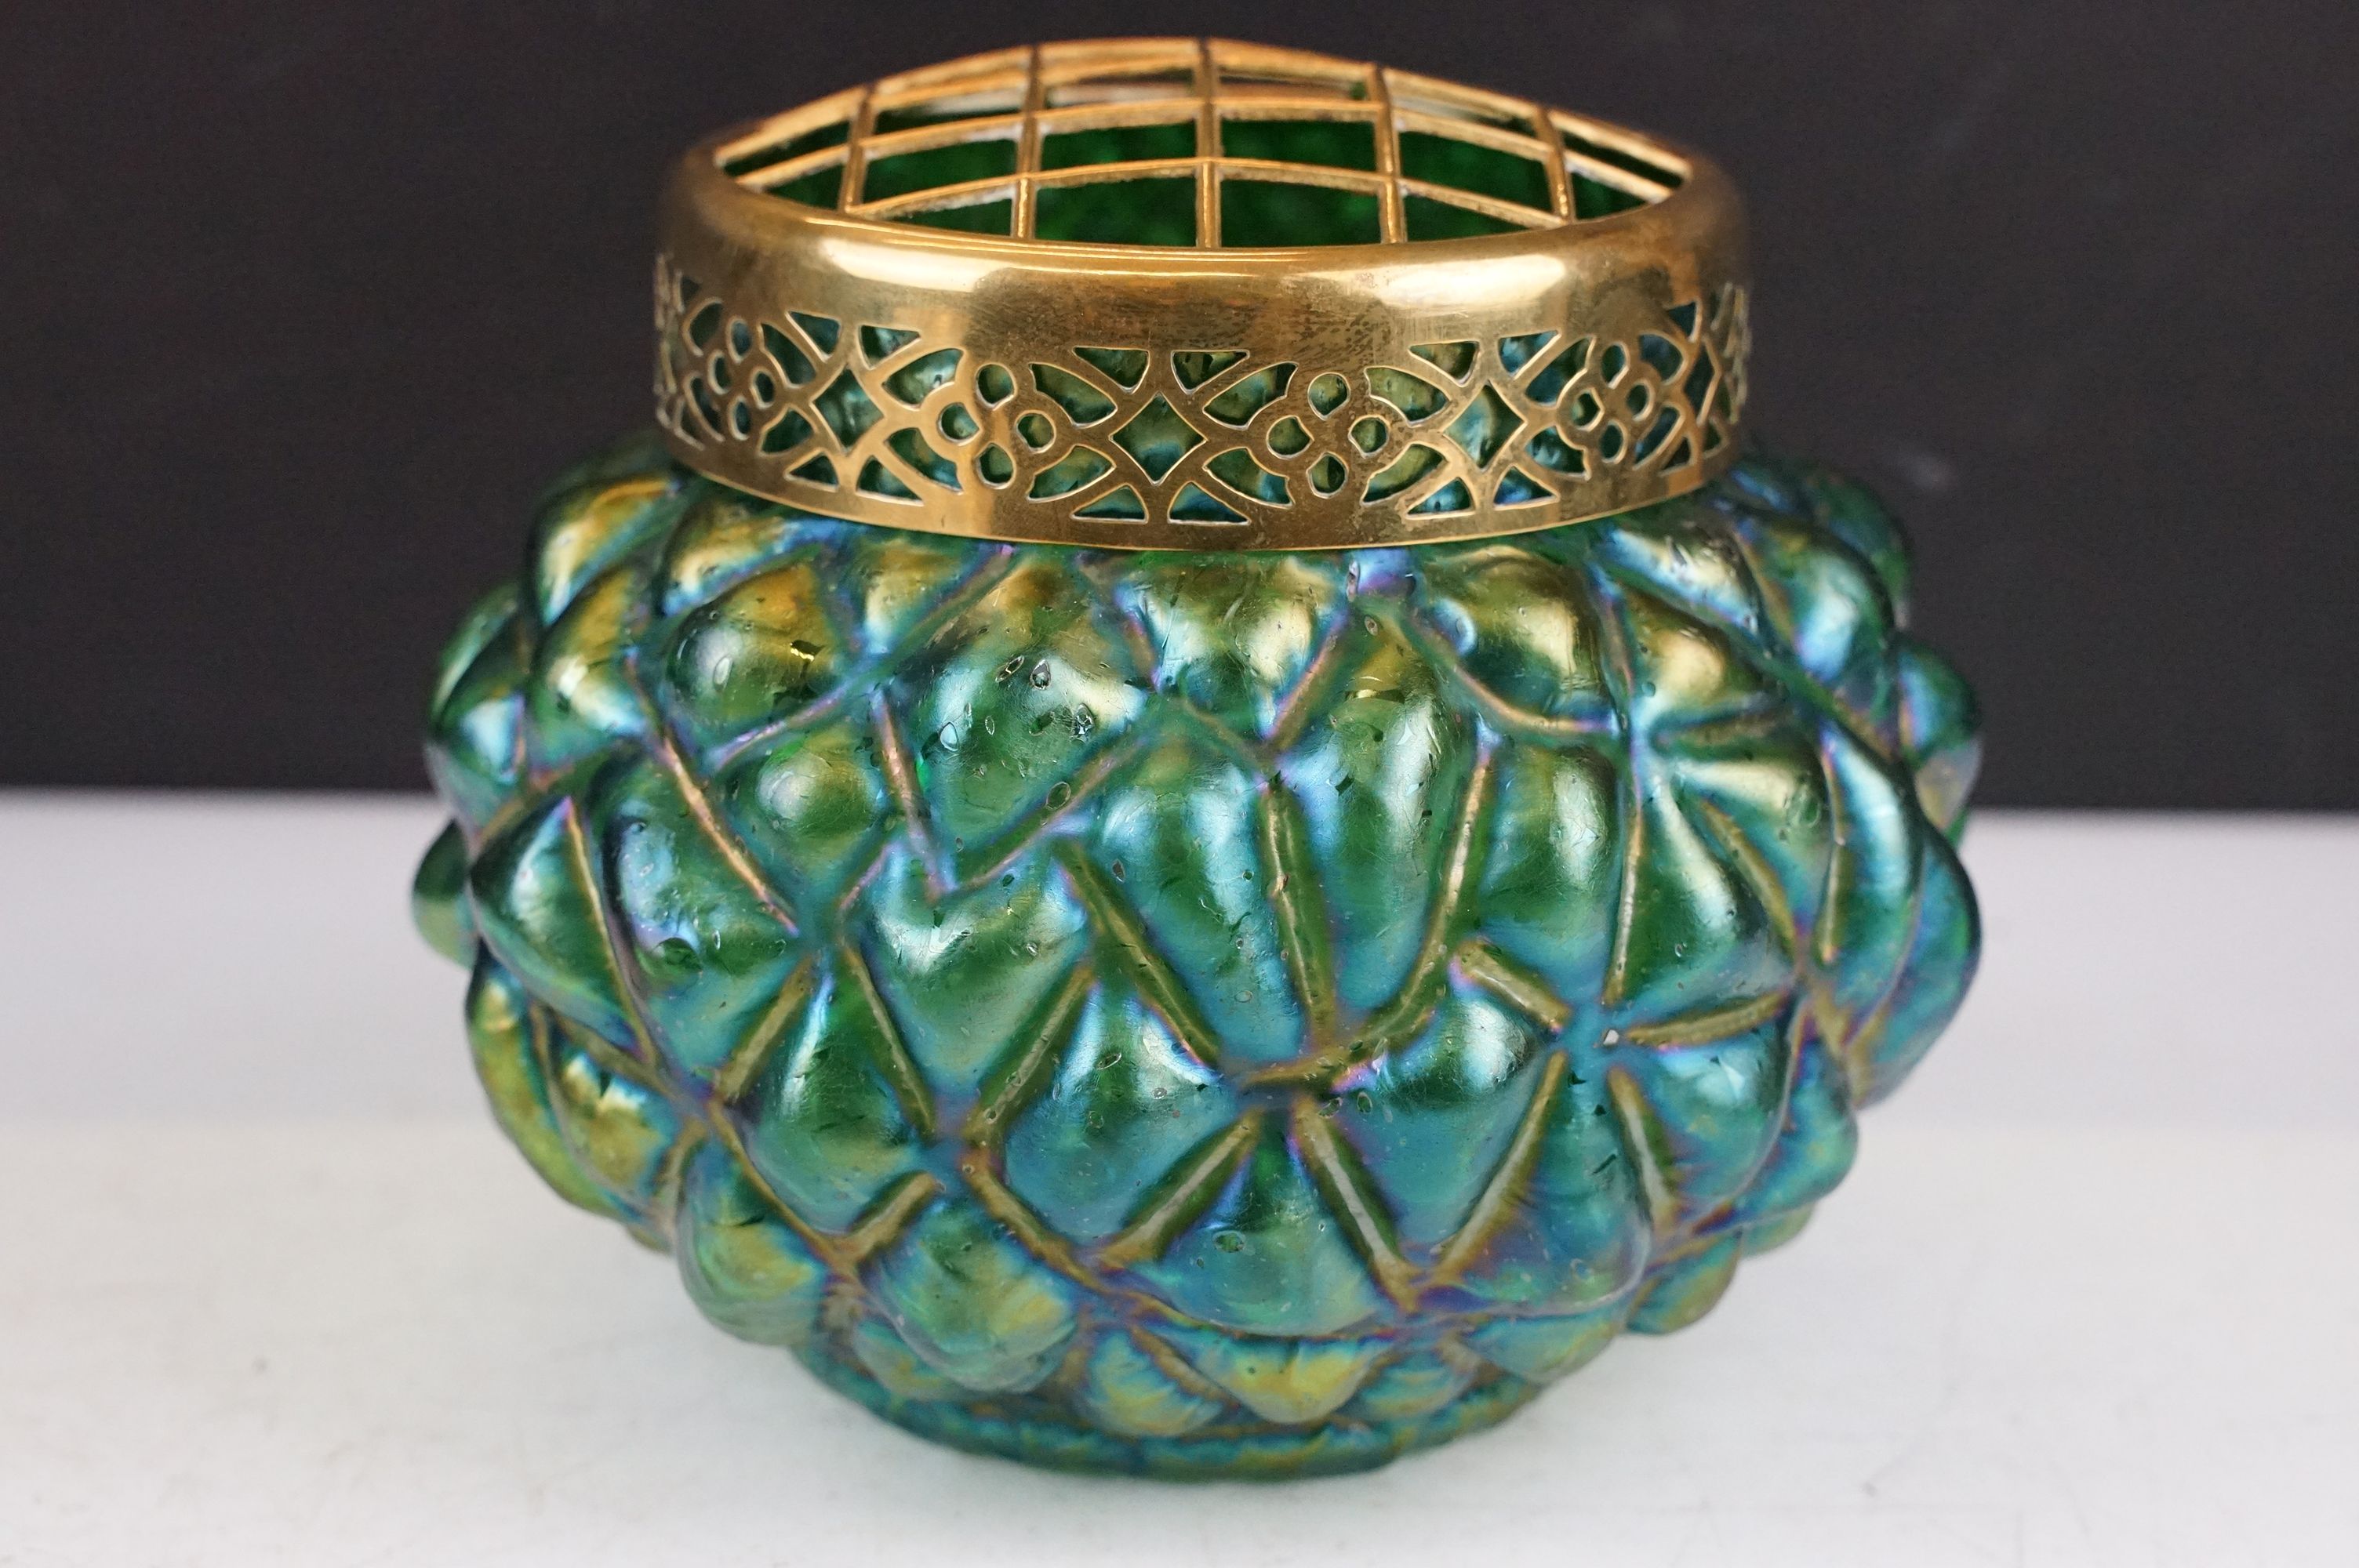 Two early 20th century Kralik iridescent glass rose bowls to include a green glass textured - Image 8 of 14